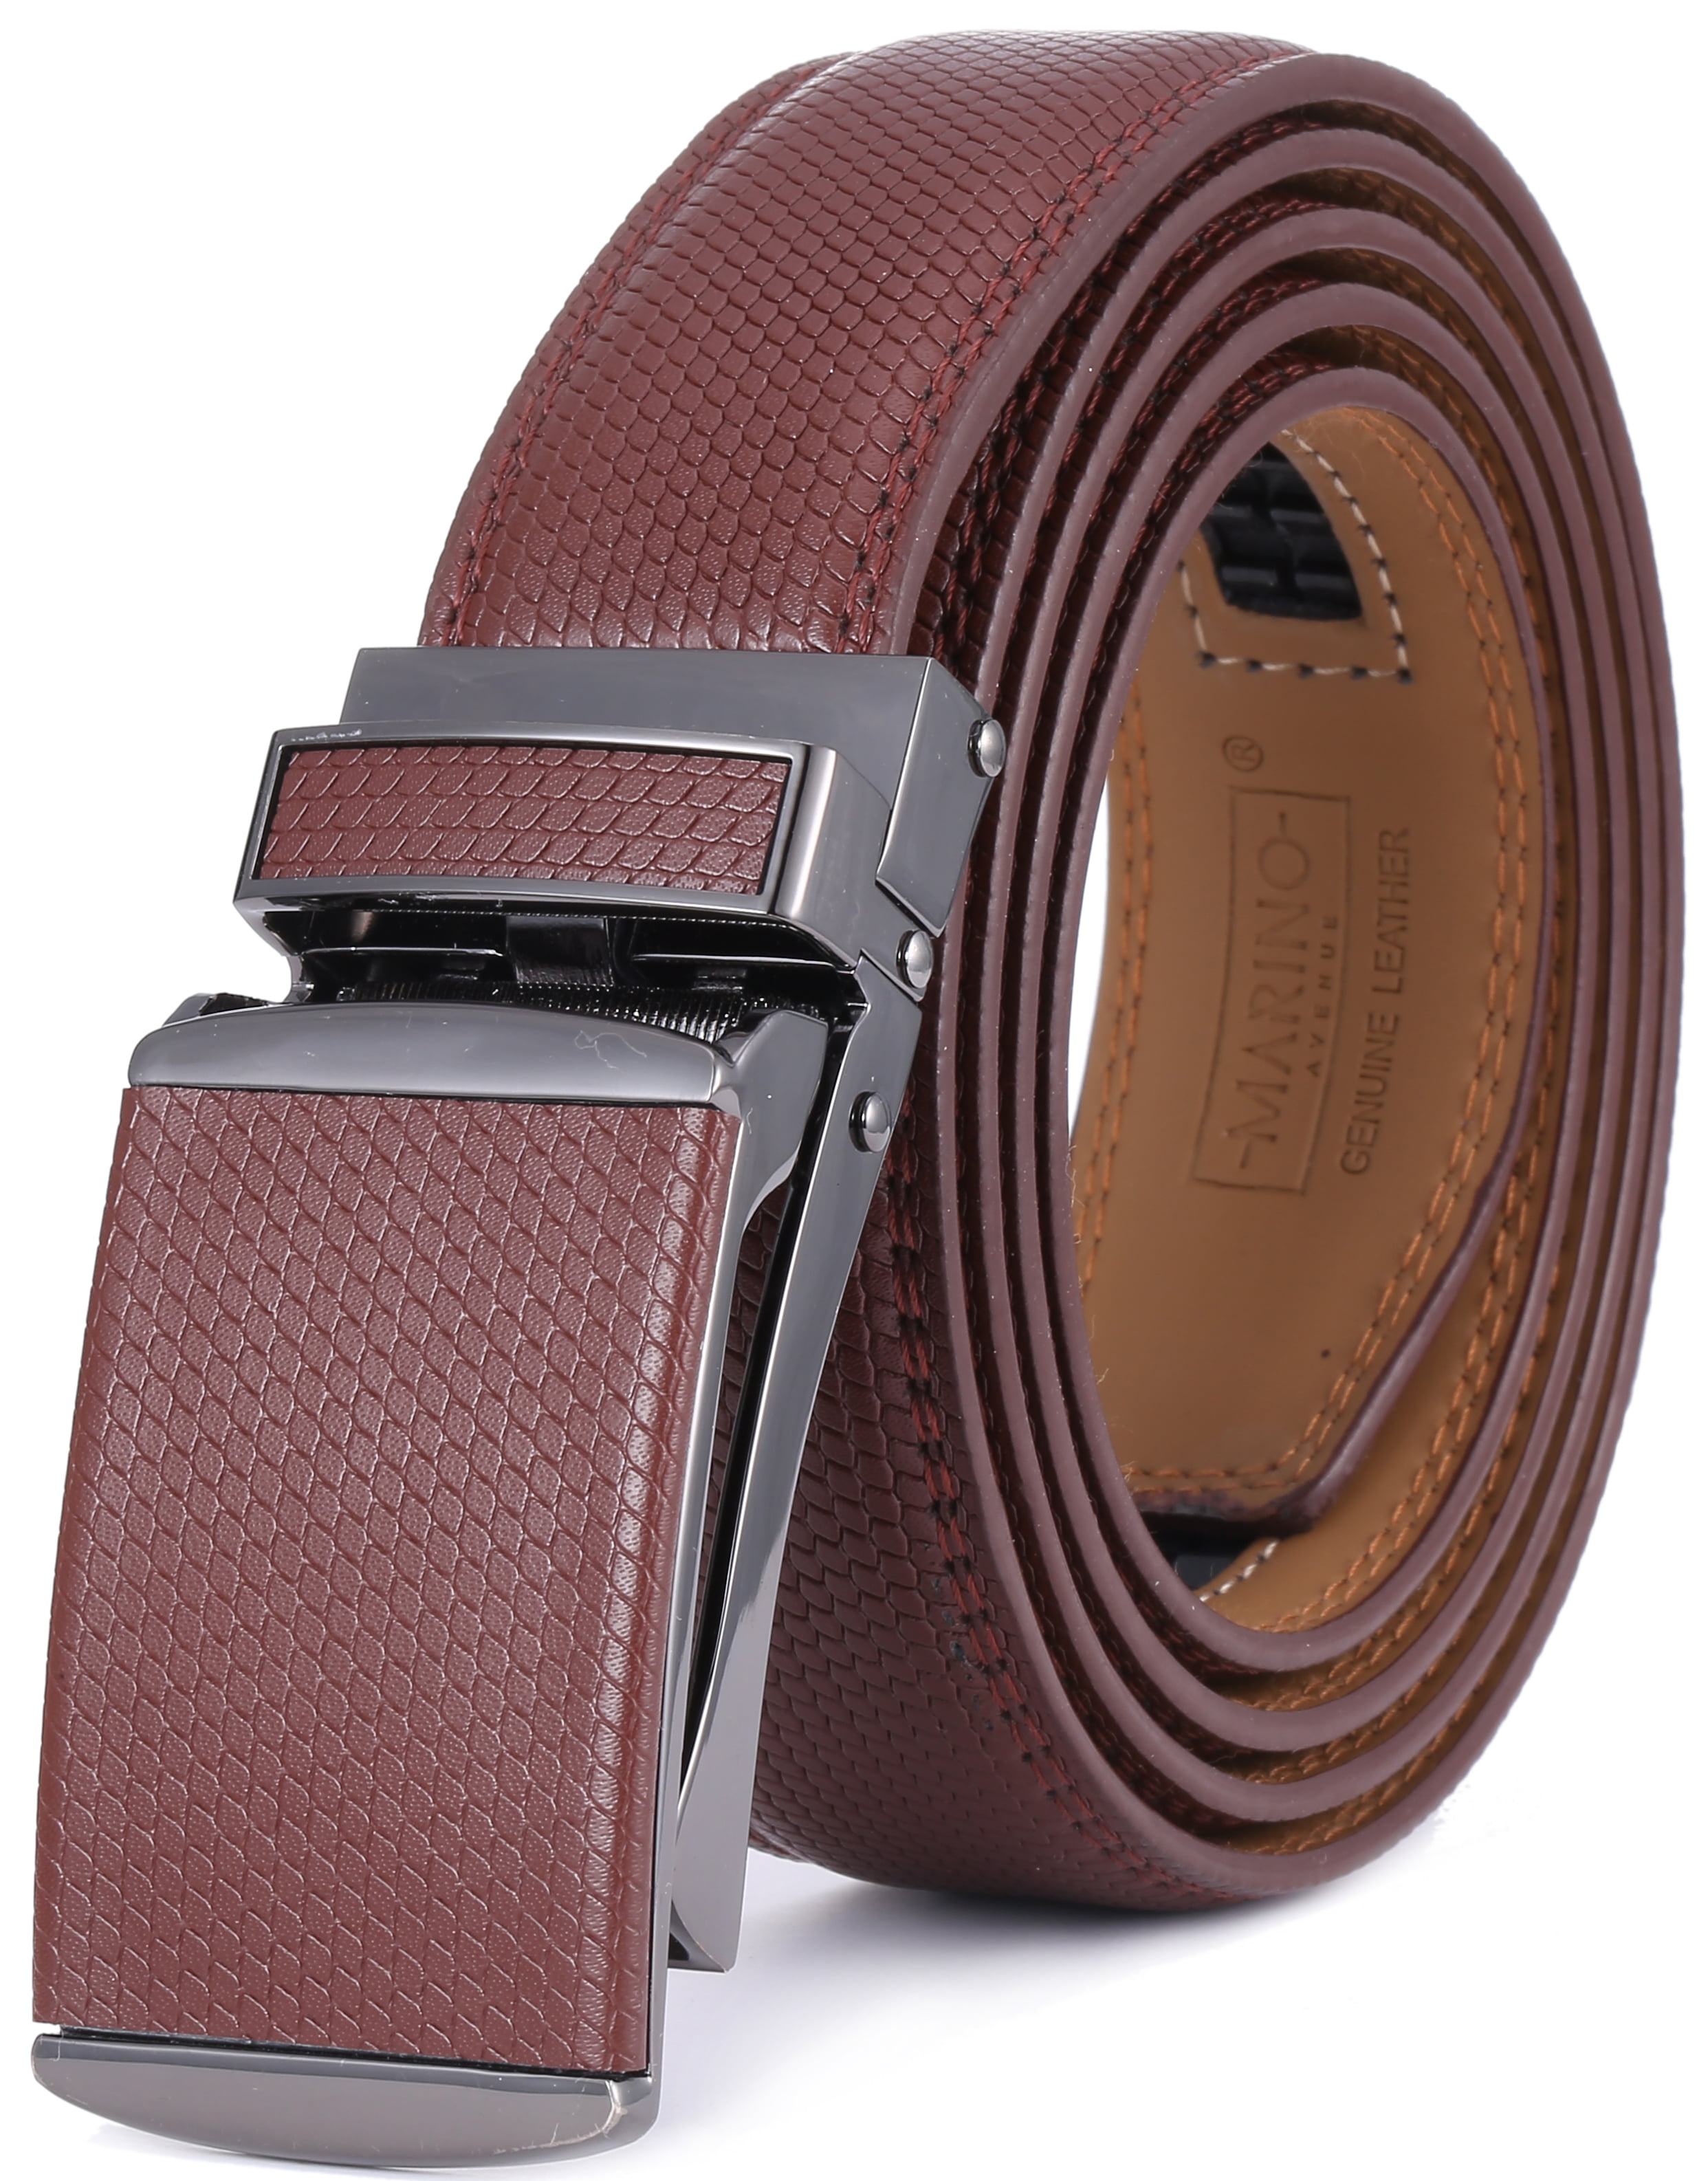 Enclosed in an Elegant Gift Box Marino Avenue Mens Genuine Leather Ratchet Dress Belt with Open Linxx Leather Buckle